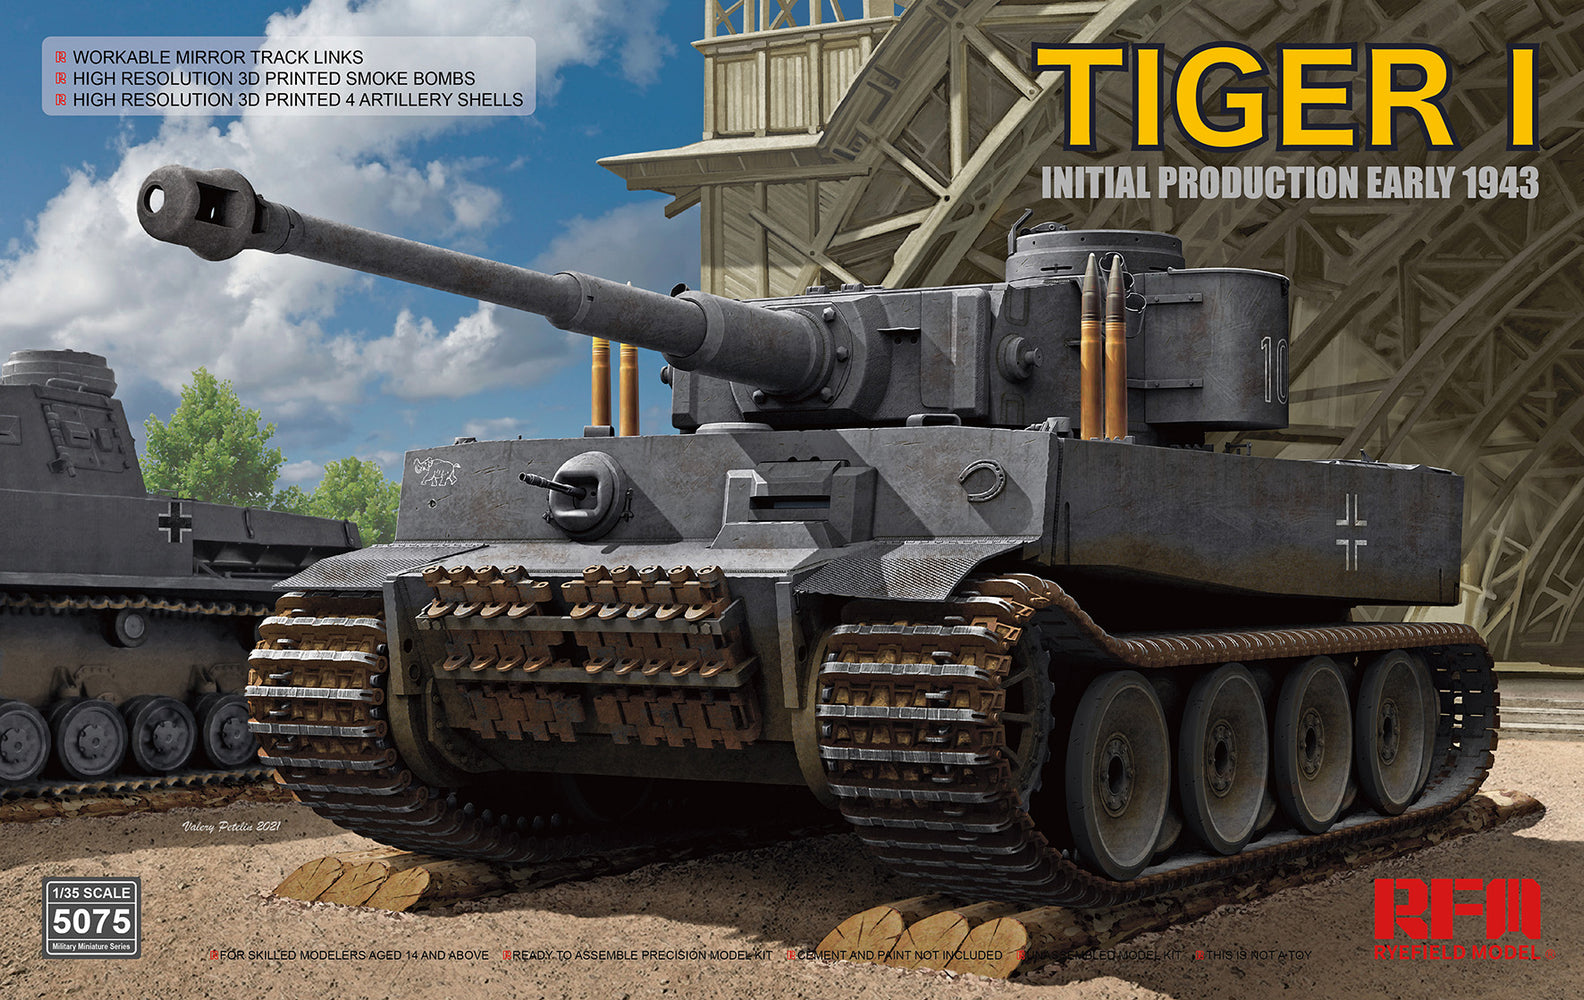 Rye Field RM5075 1/35 Tiger I Initial Production w/ Workable Mirror Tracks